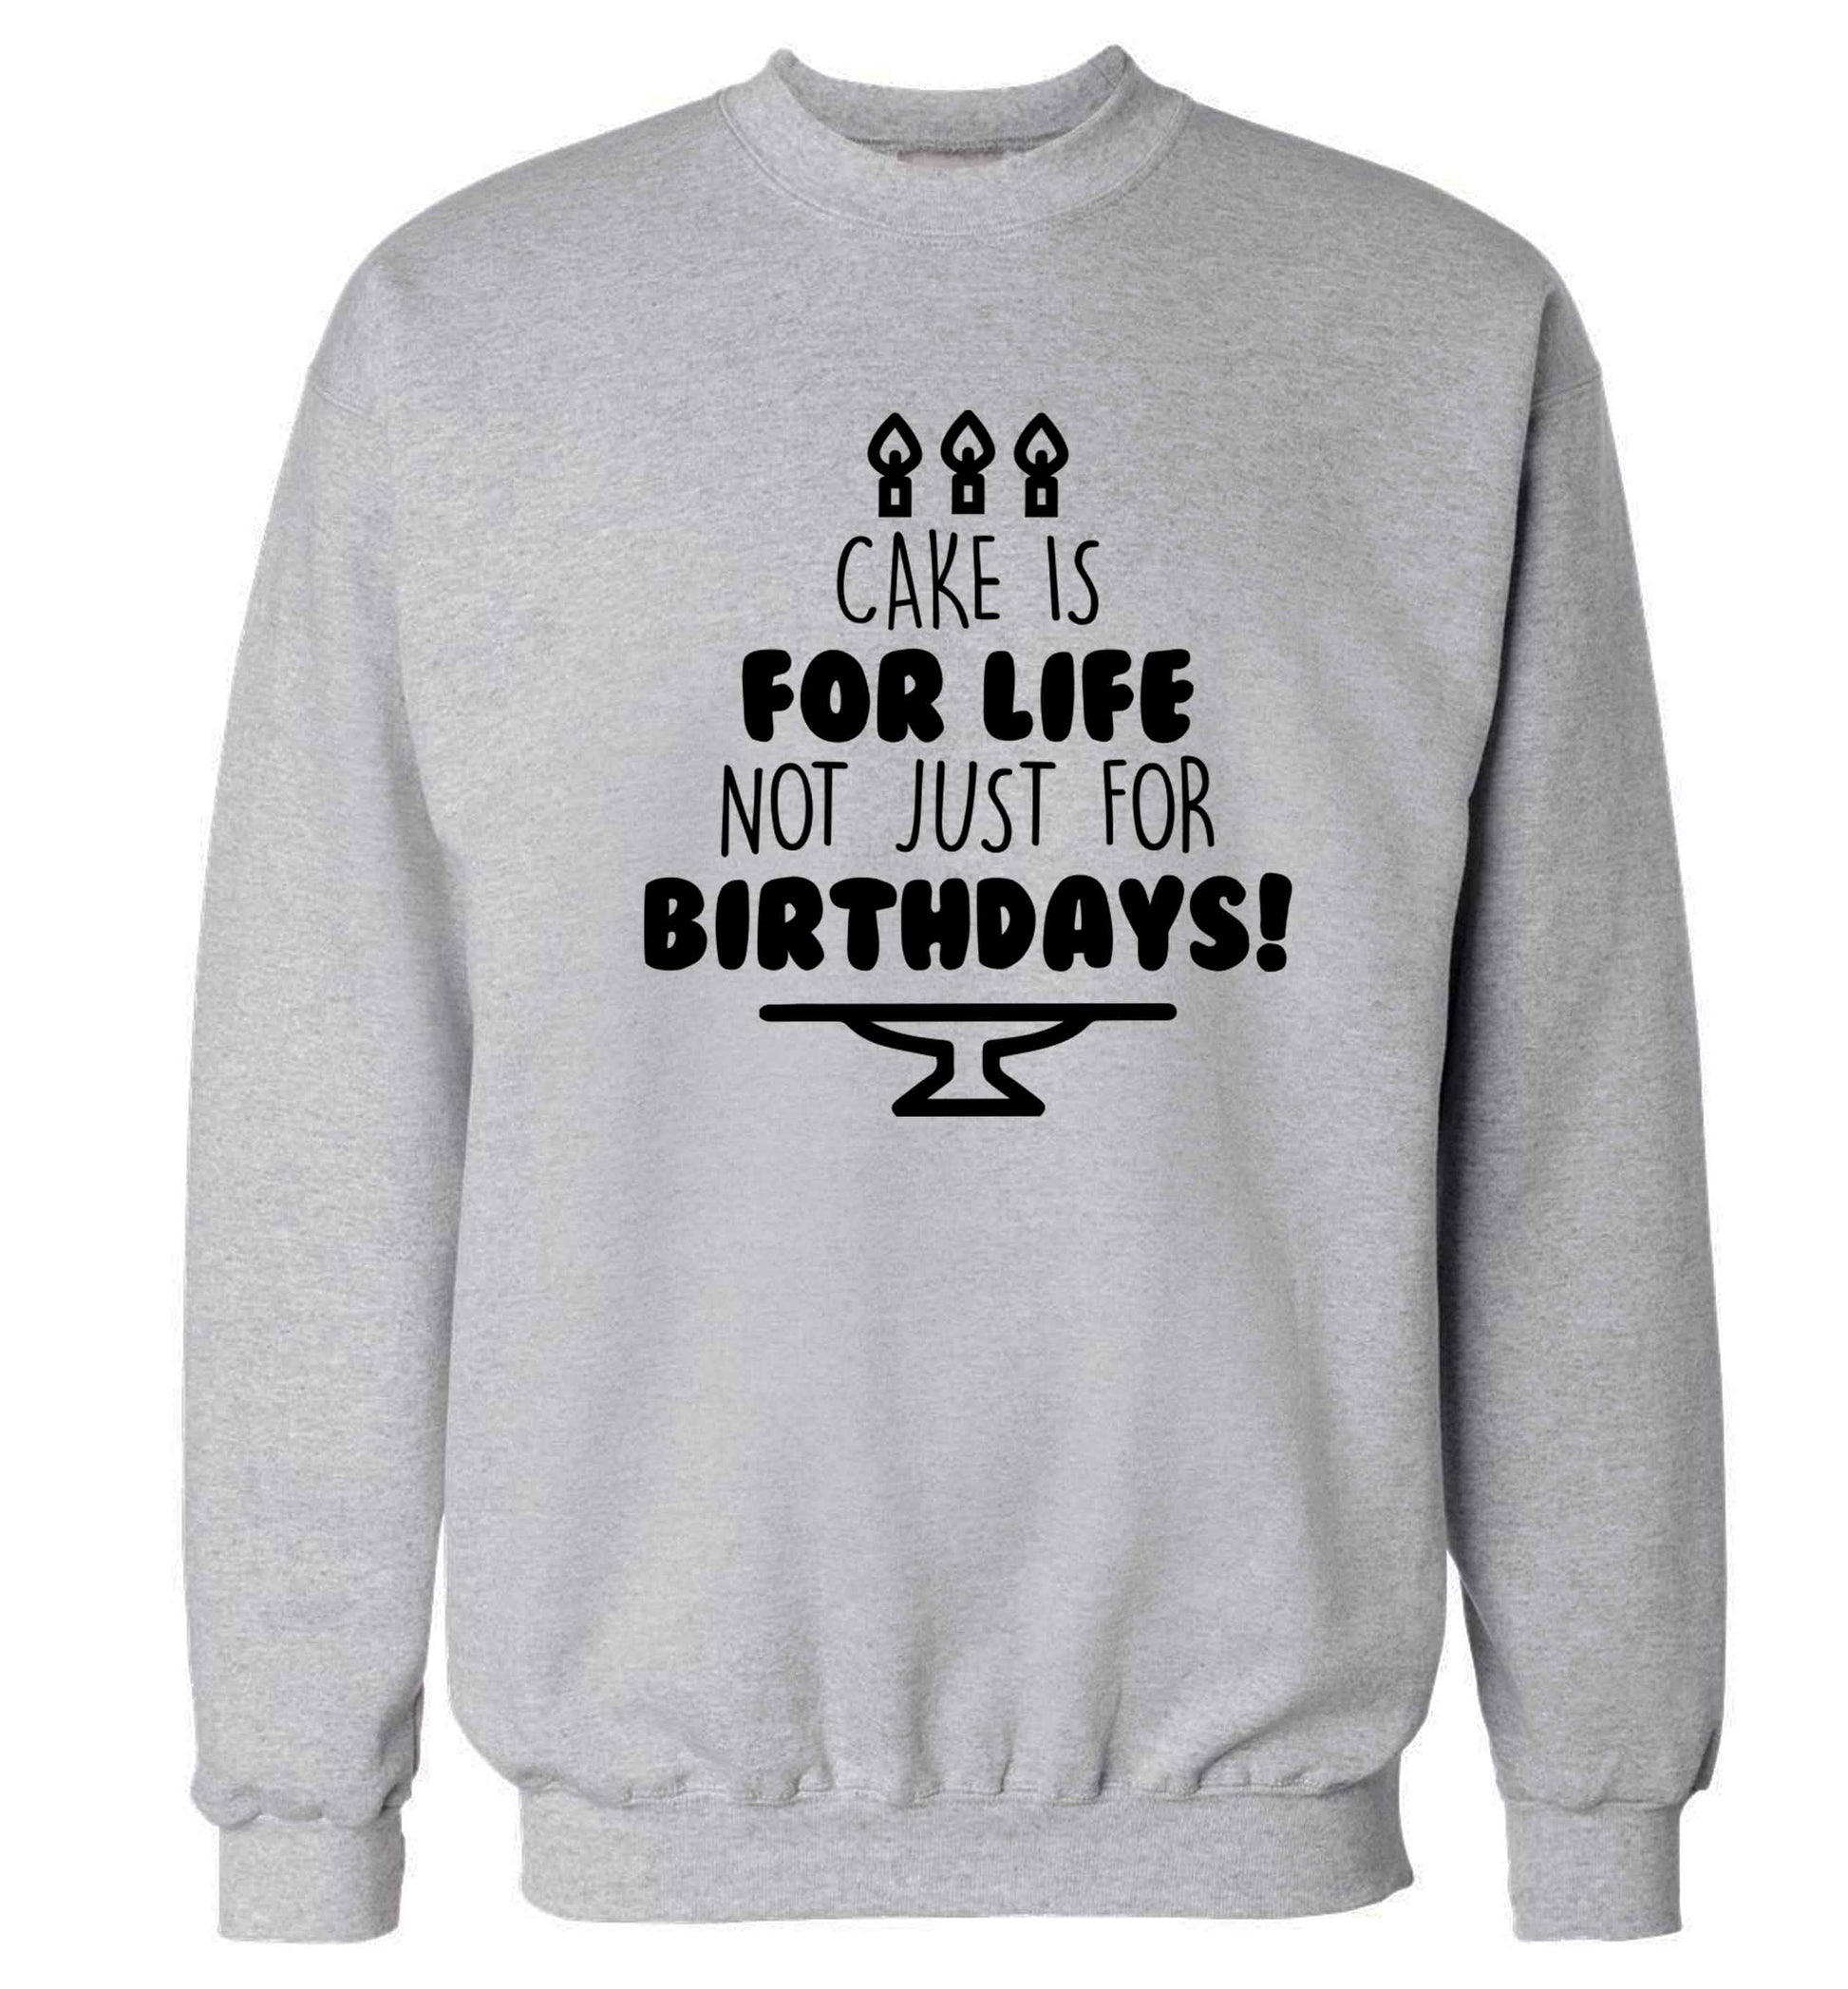 Cake is for life not just for birthdays Adult's unisex grey Sweater 2XL